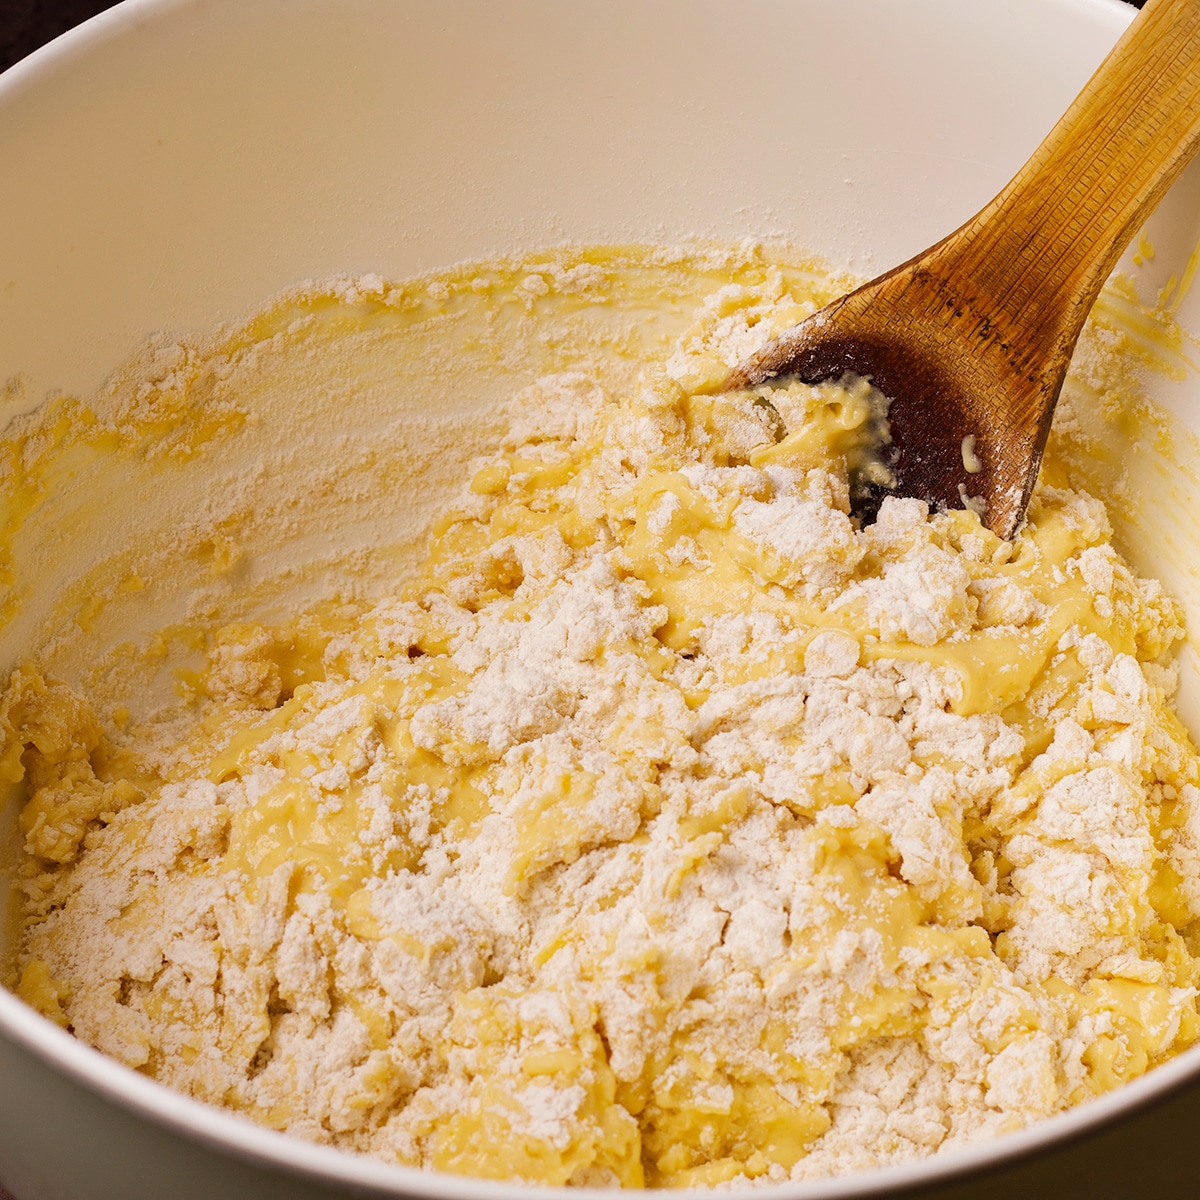 Using a wooden spoon to stir the dry ingredients into the wet ingredients to make muffin batter.